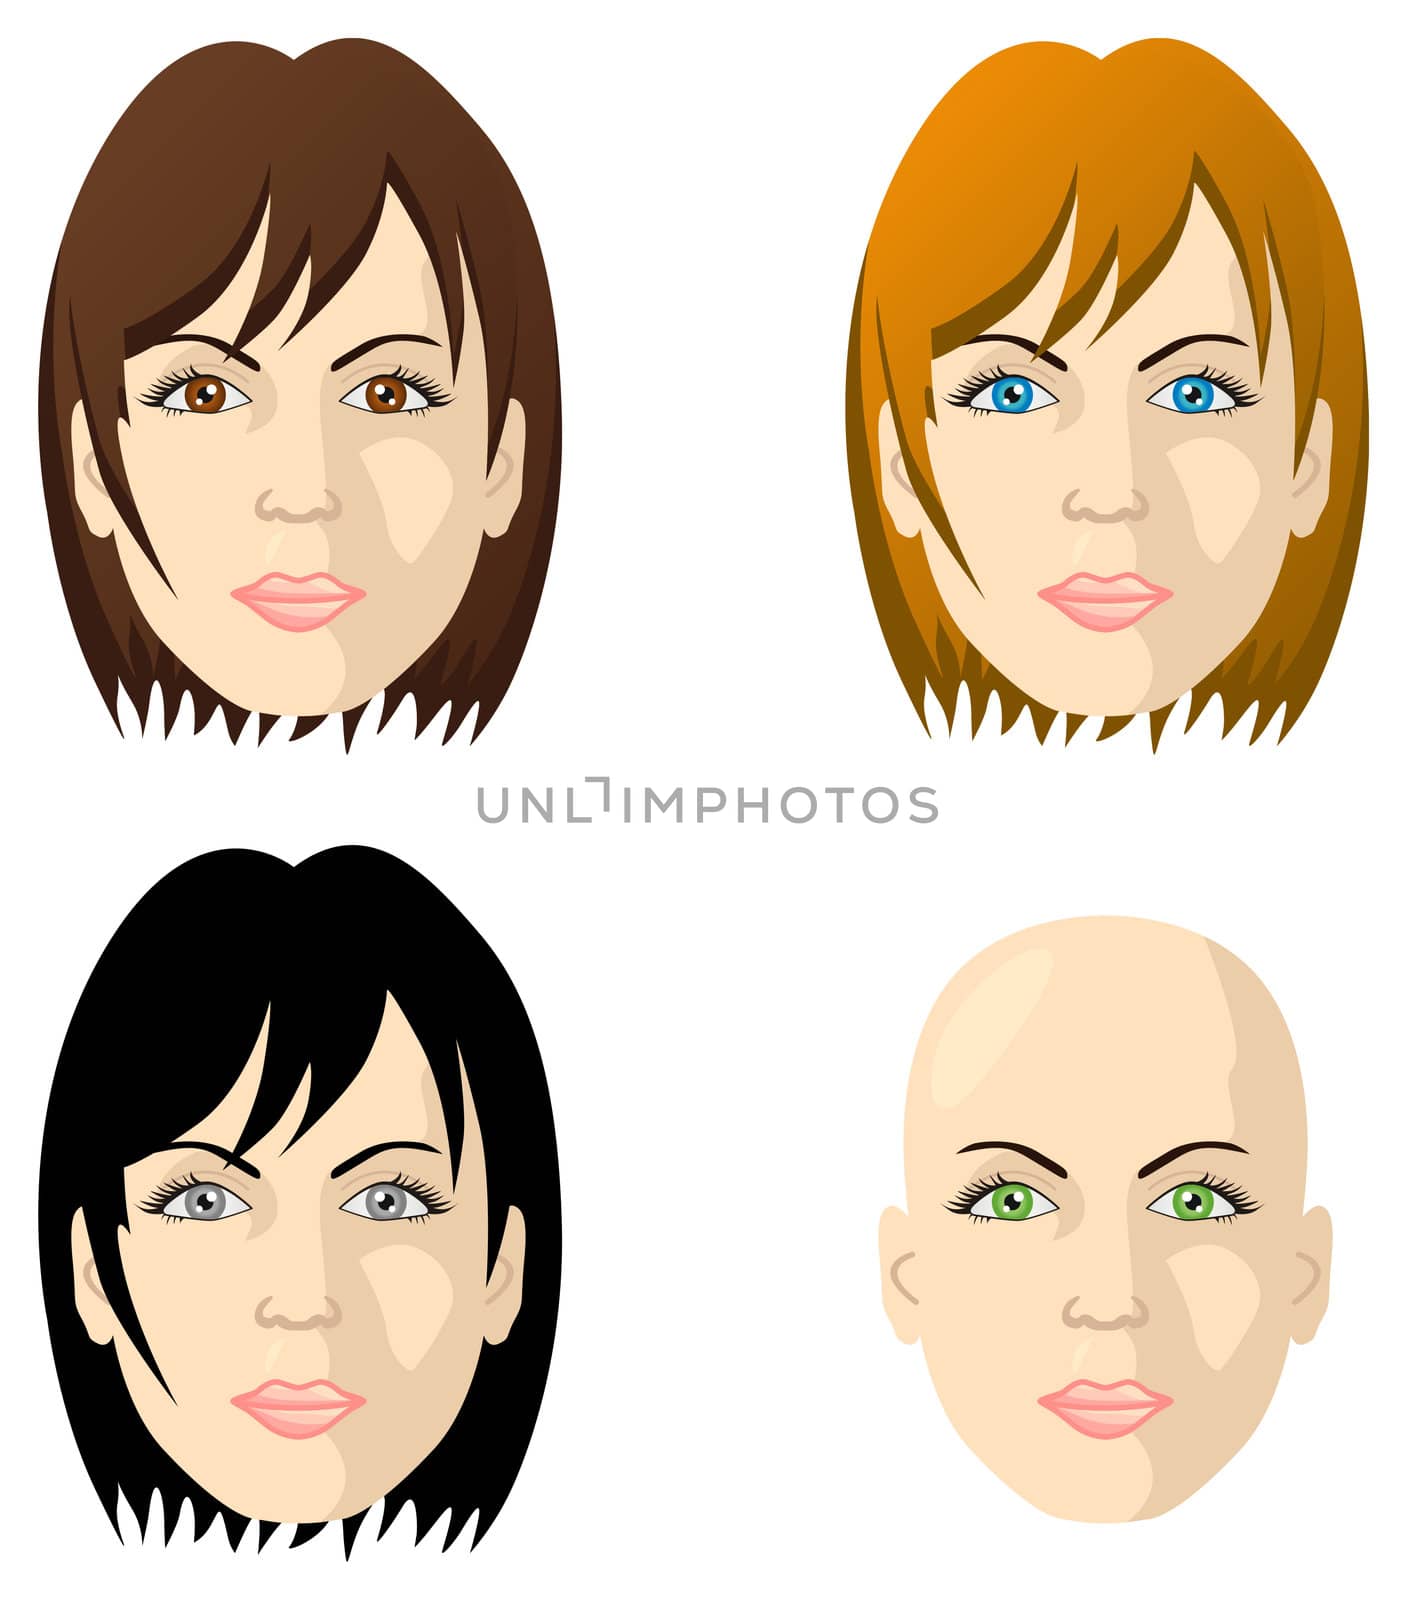 Women's faces, different color eyes and hair